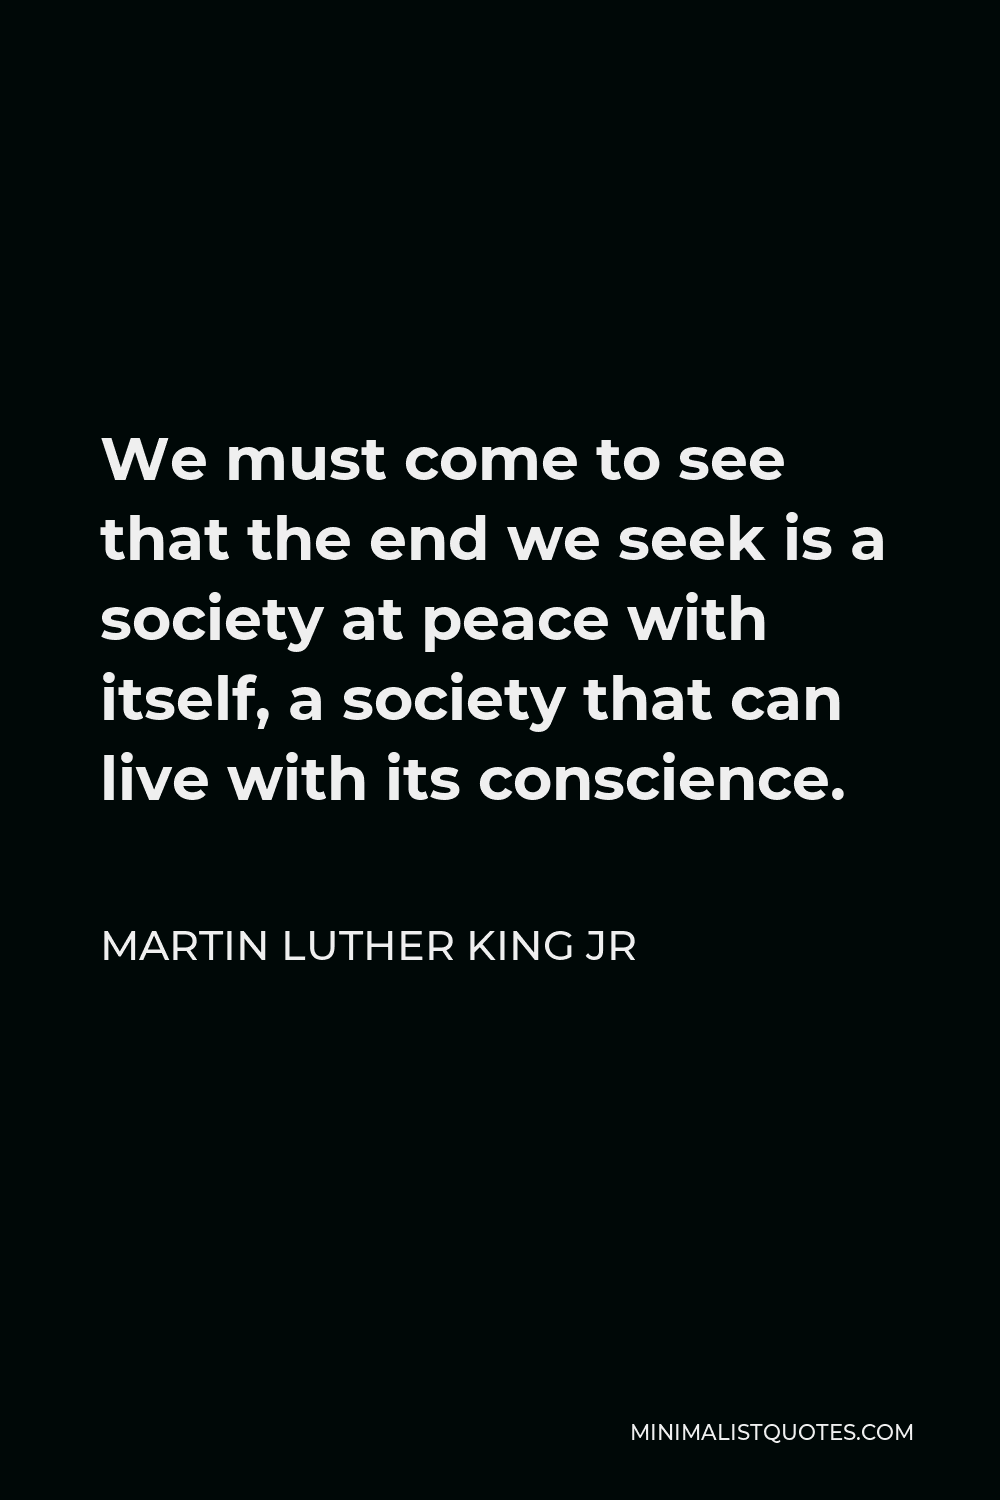 Martin Luther King Jr Quote: We must come to see that the end we seek is a society at peace with itself, a society that can live with its conscience.